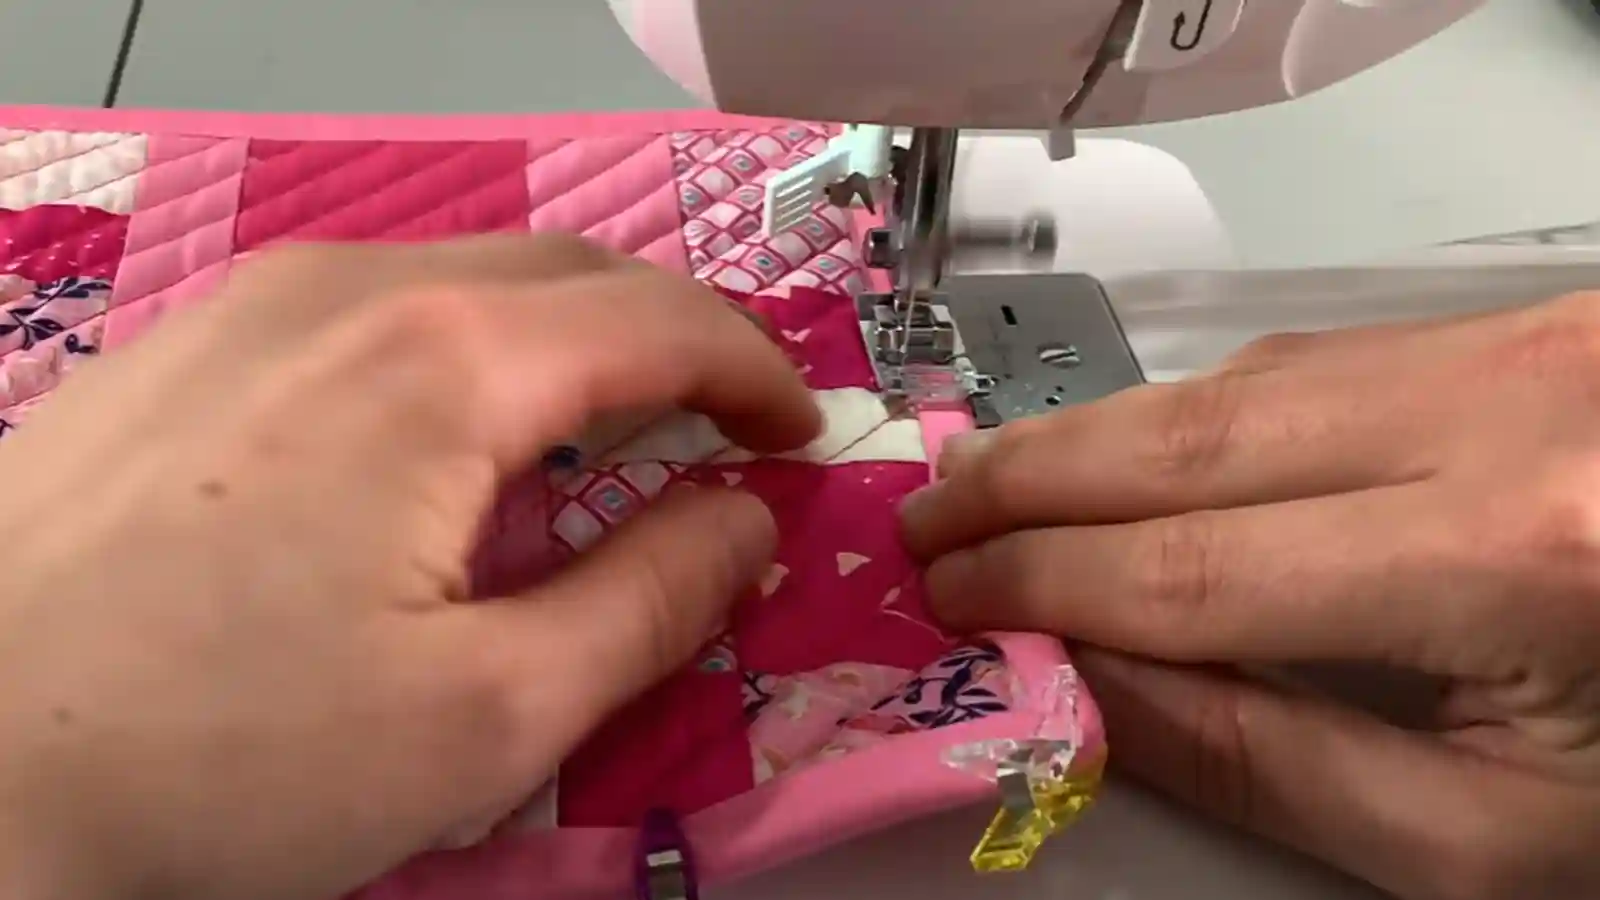 How to Bind a Quilt